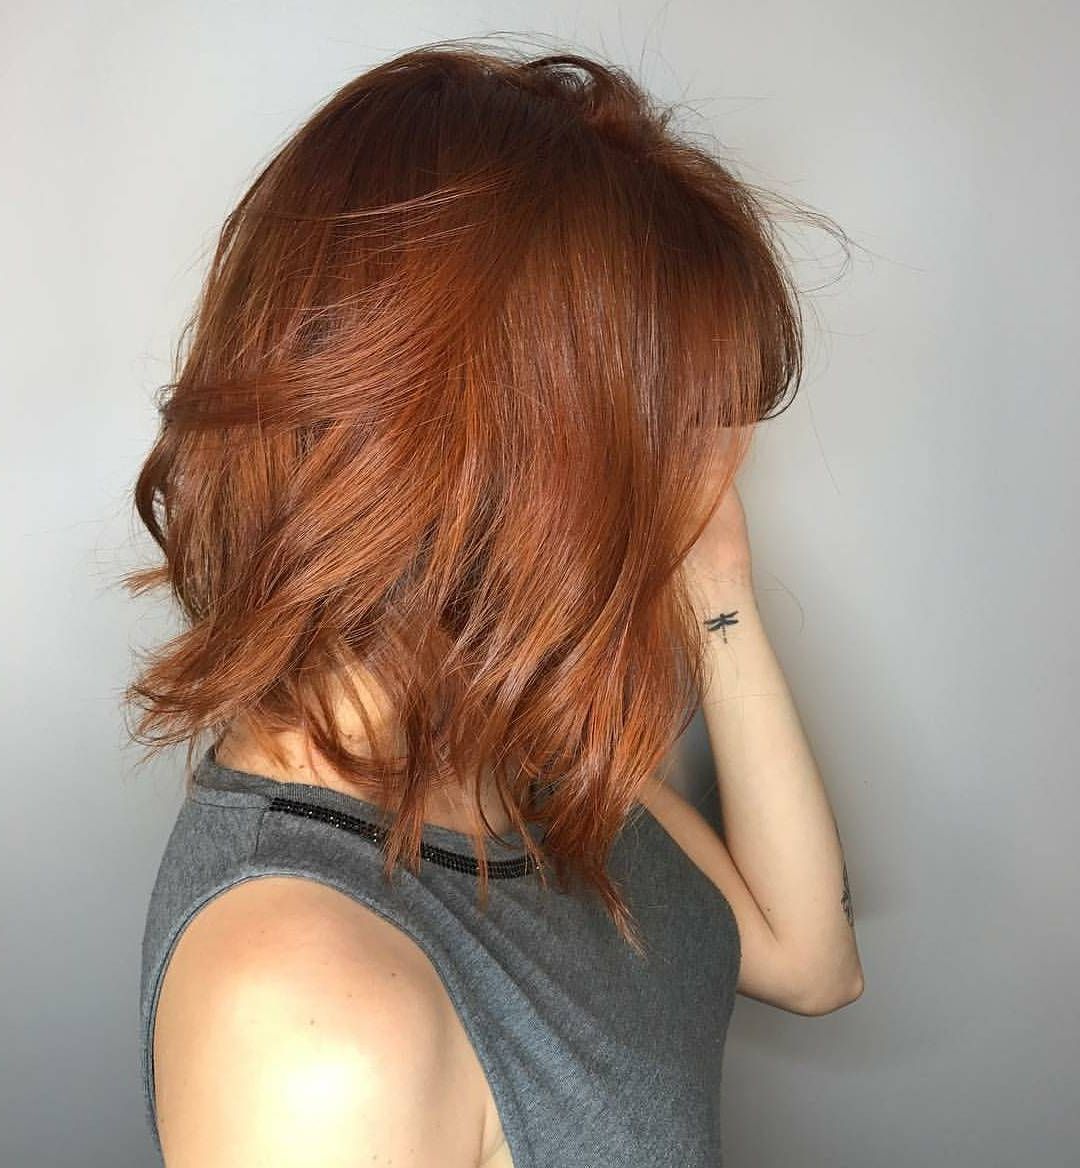 10 Super Cute And Easy Medium Hairstyles 2020 With Well Known Bedhead Auburn Shag Haircuts (View 12 of 20)